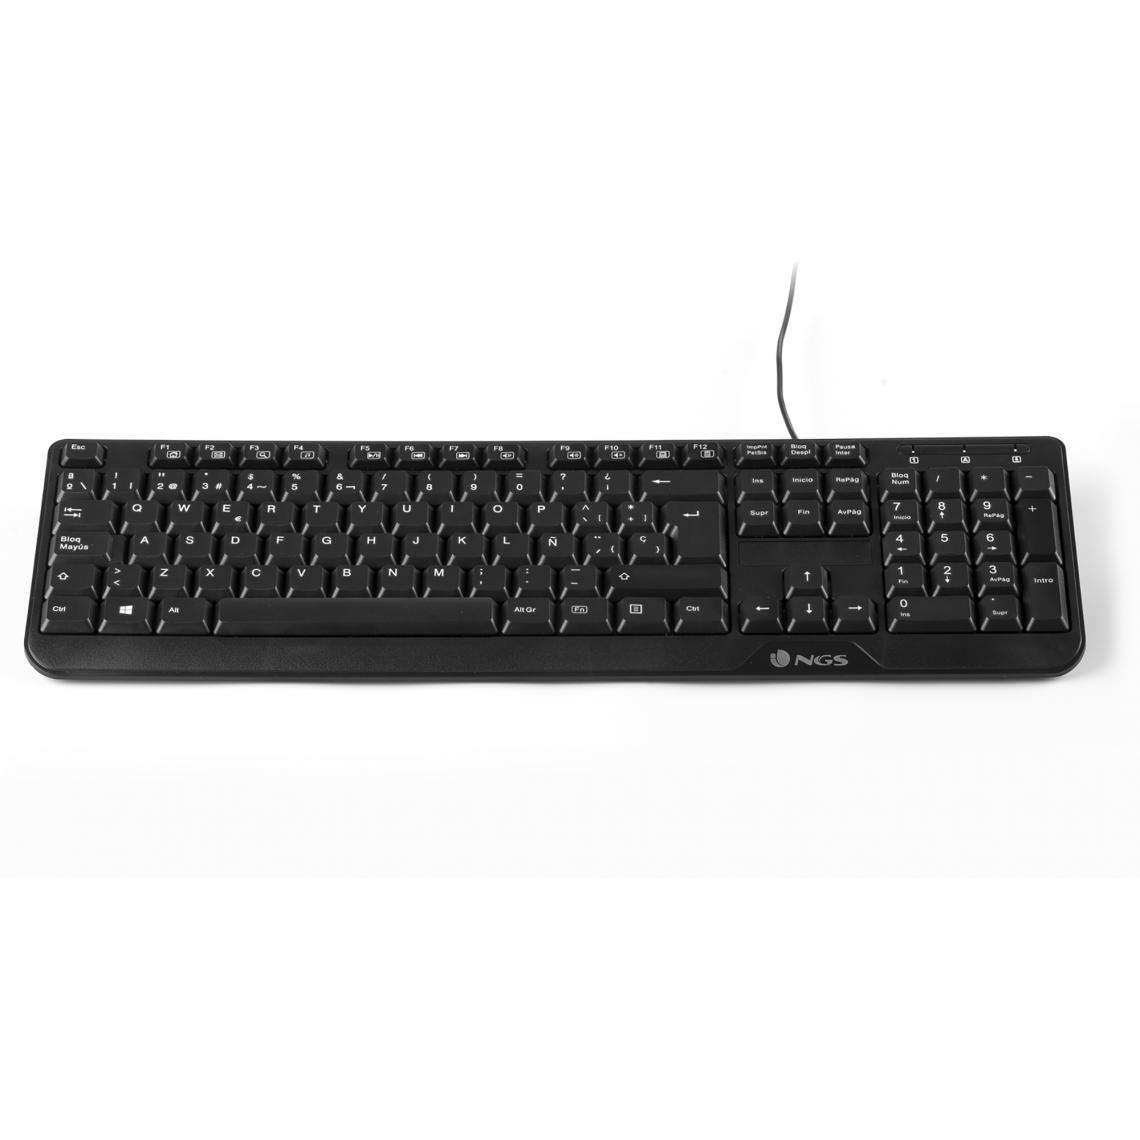 Ngs - Clavier filaire Funky V3 (Noir) - Clavier